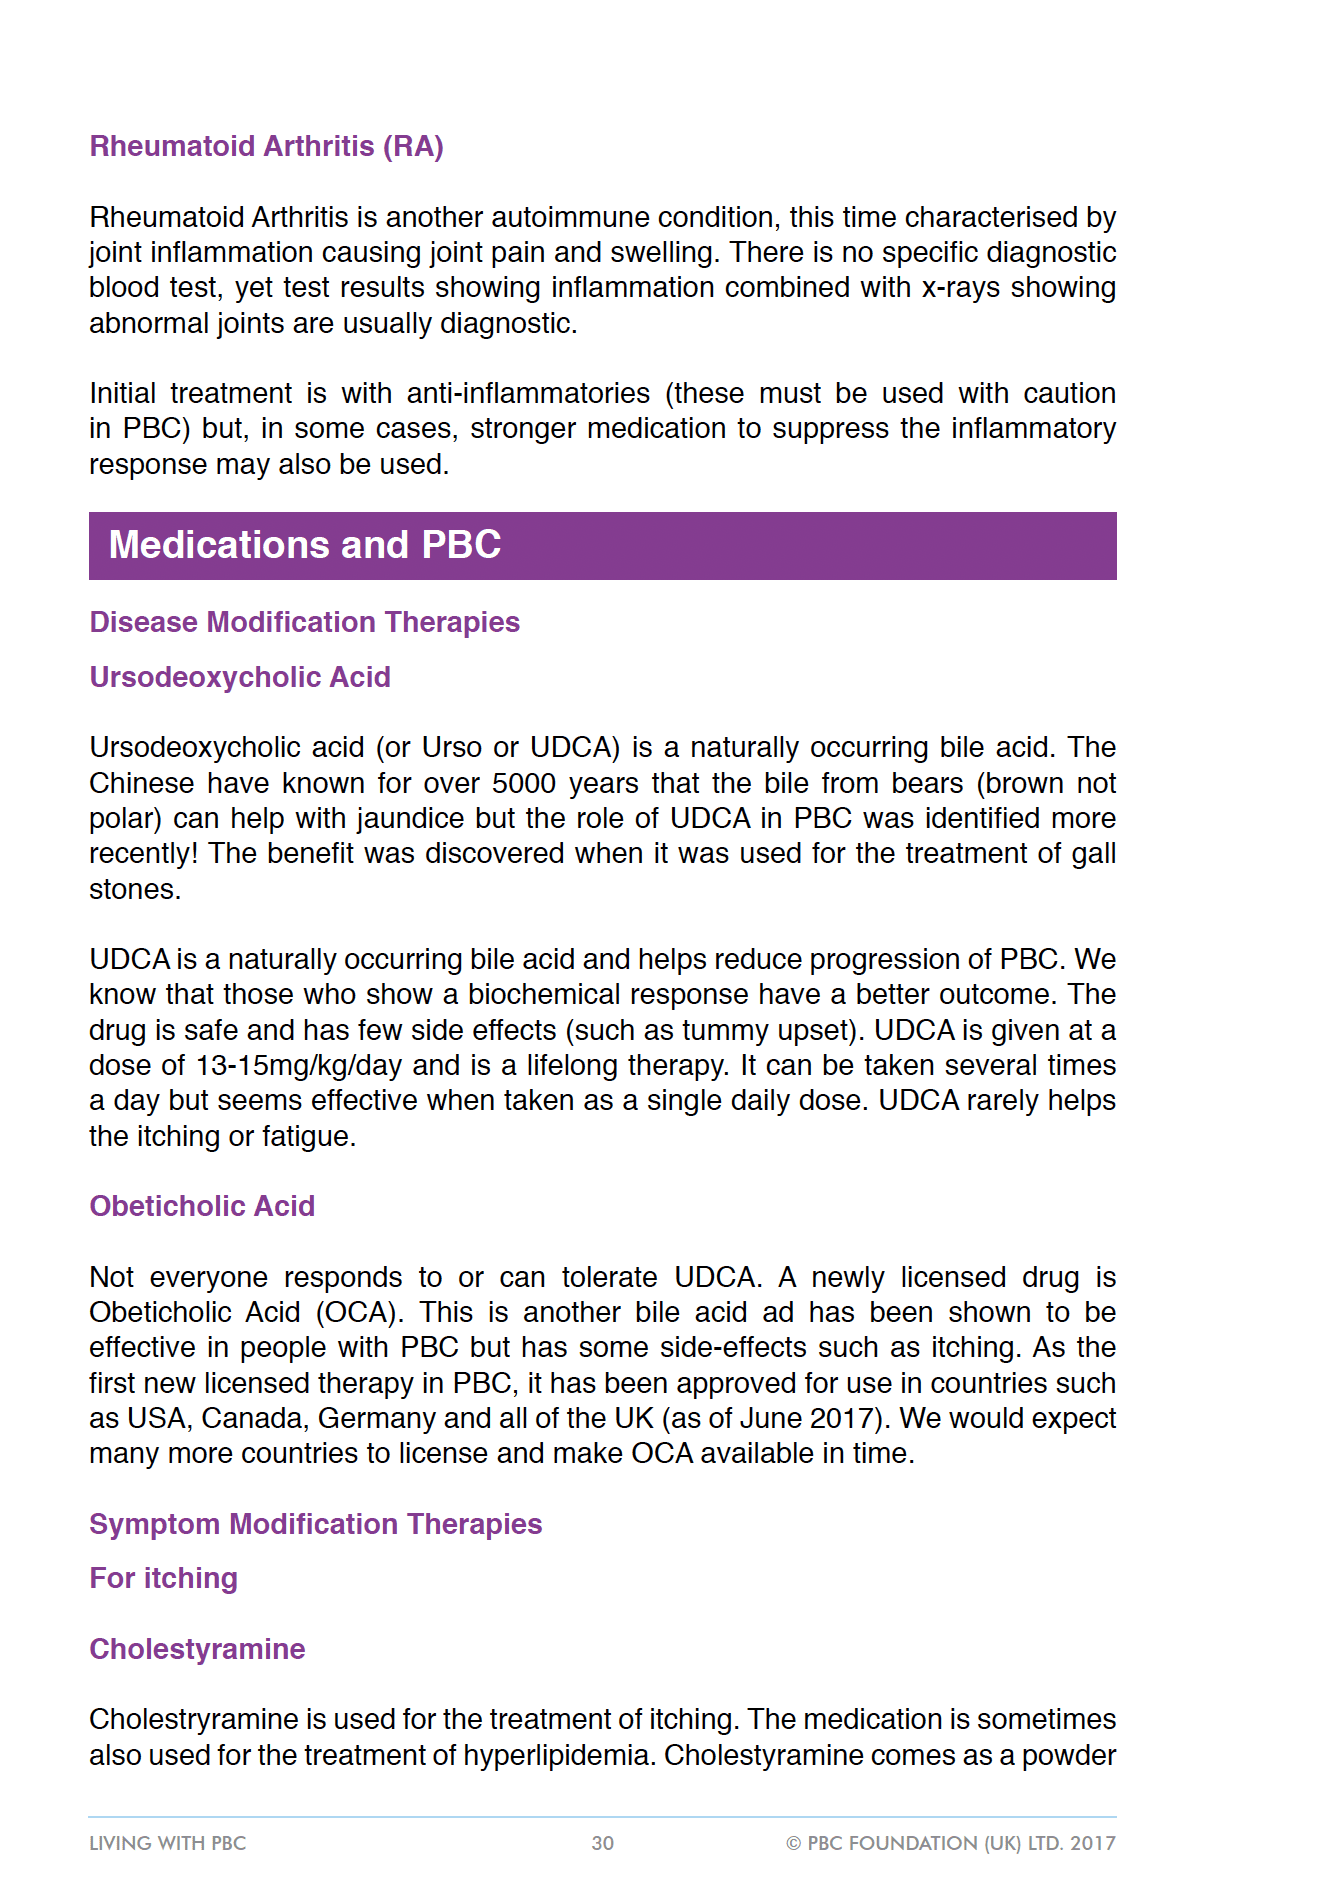 A page of text from the PBC Foundation Compendium about medications and PBC